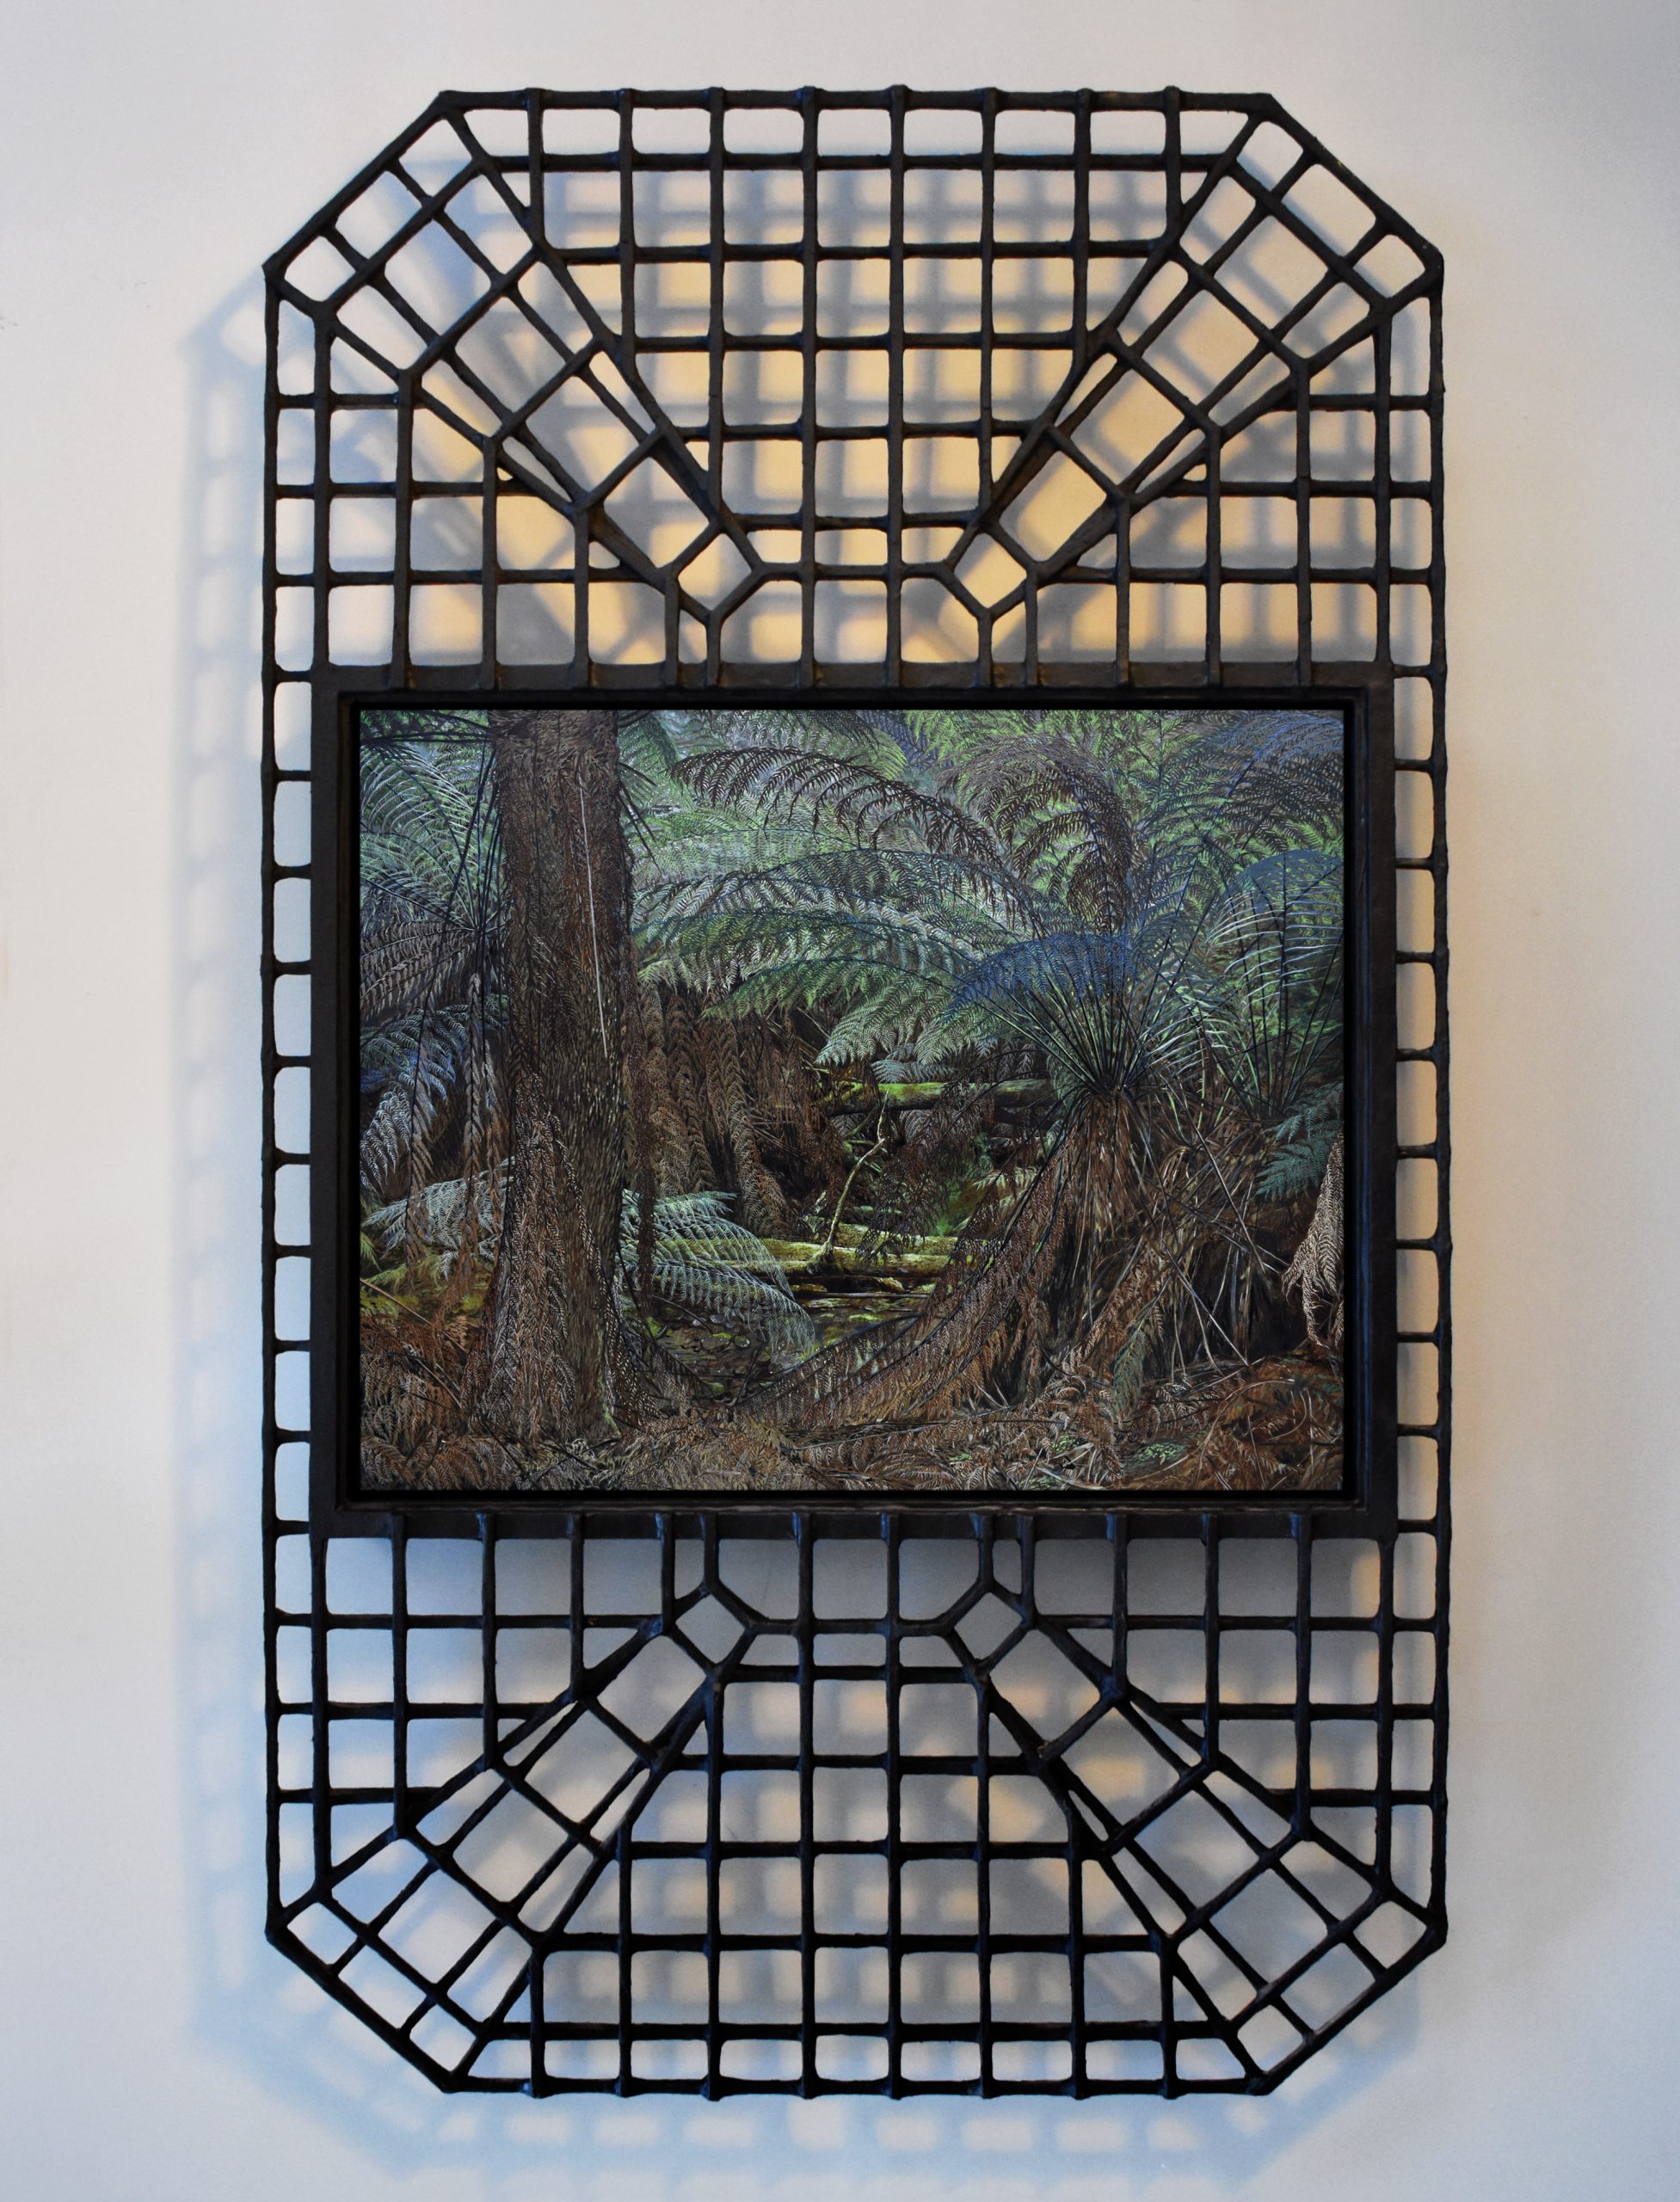 WC13 - Canopy of ferns and steel. 2020. Oil on board with timber and papier-mâché frame. 1050 x 620mm